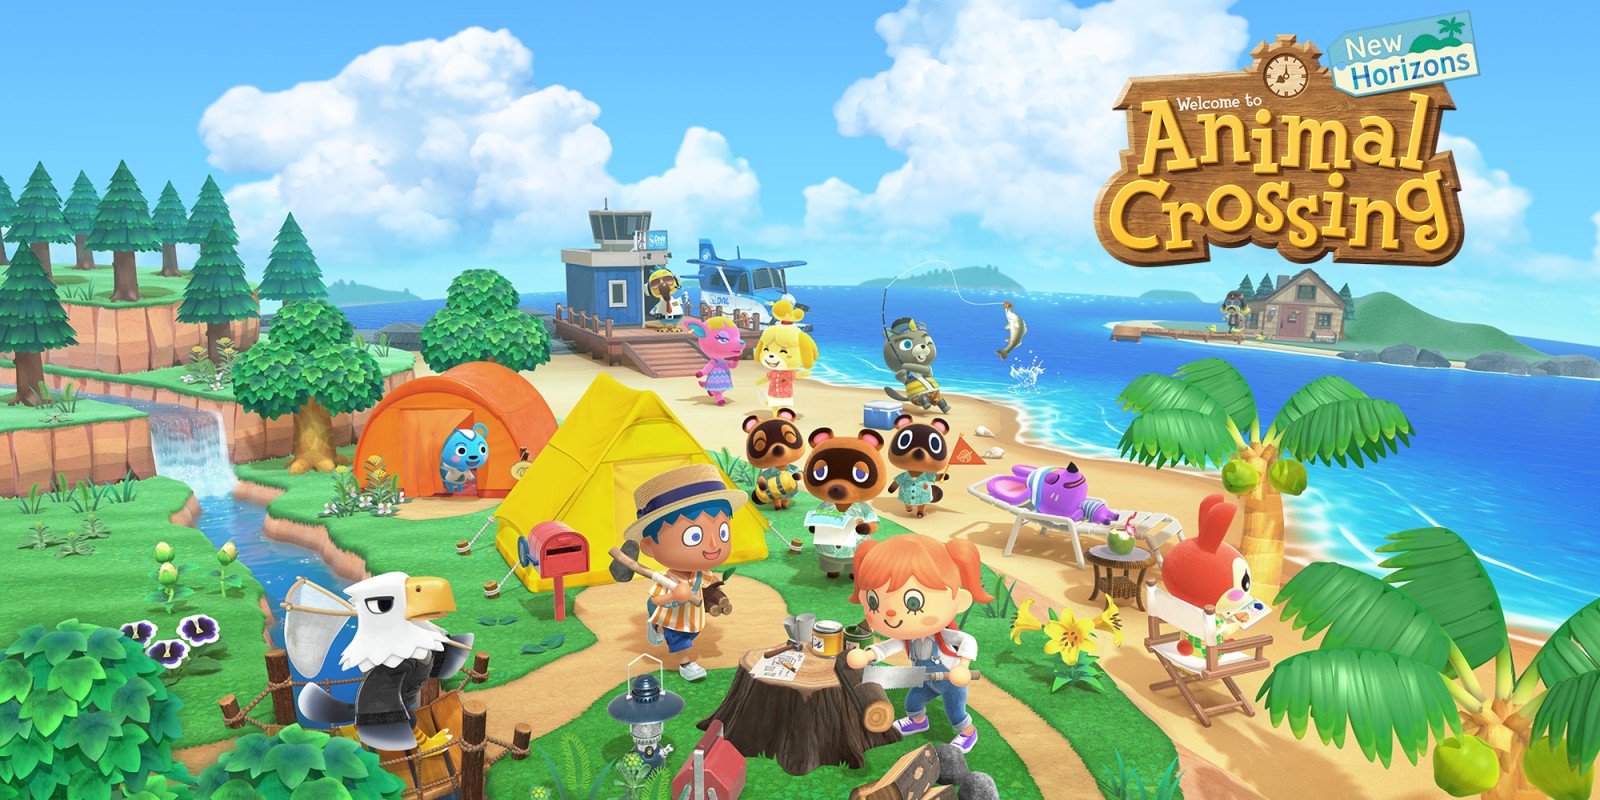 A promo for Animal Crossing: New Horizons, showing two humanoid characters and multiple anthropomorphic animal characters gathered on the grass.